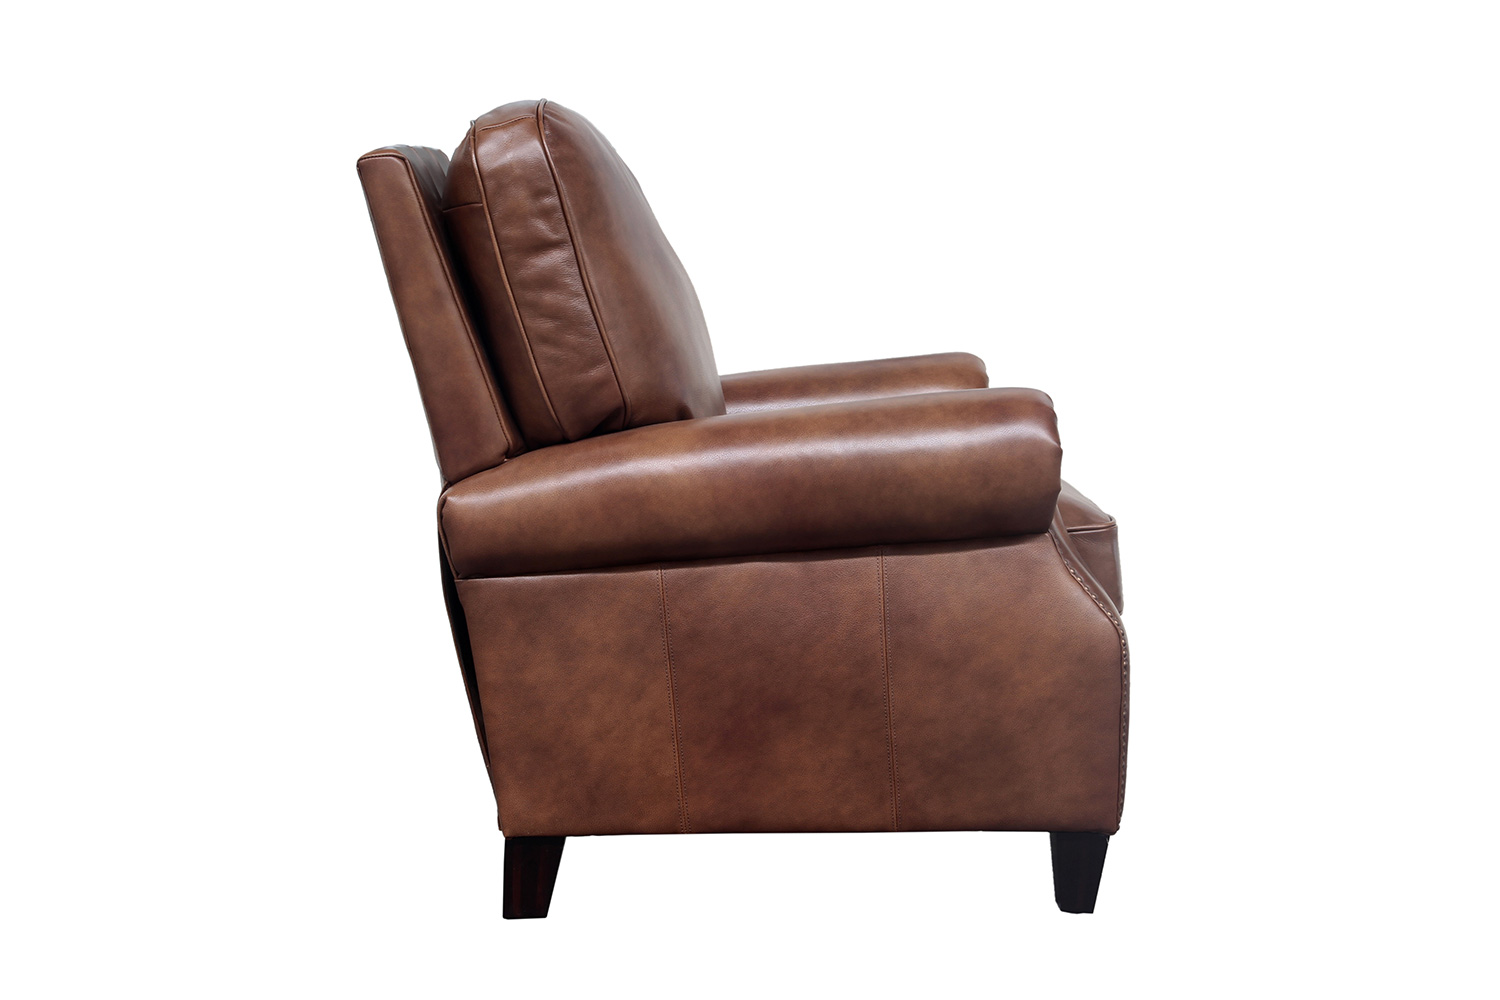 Barcalounger Briarwood Recliner Chair - Wenlock Tawny/All Leather